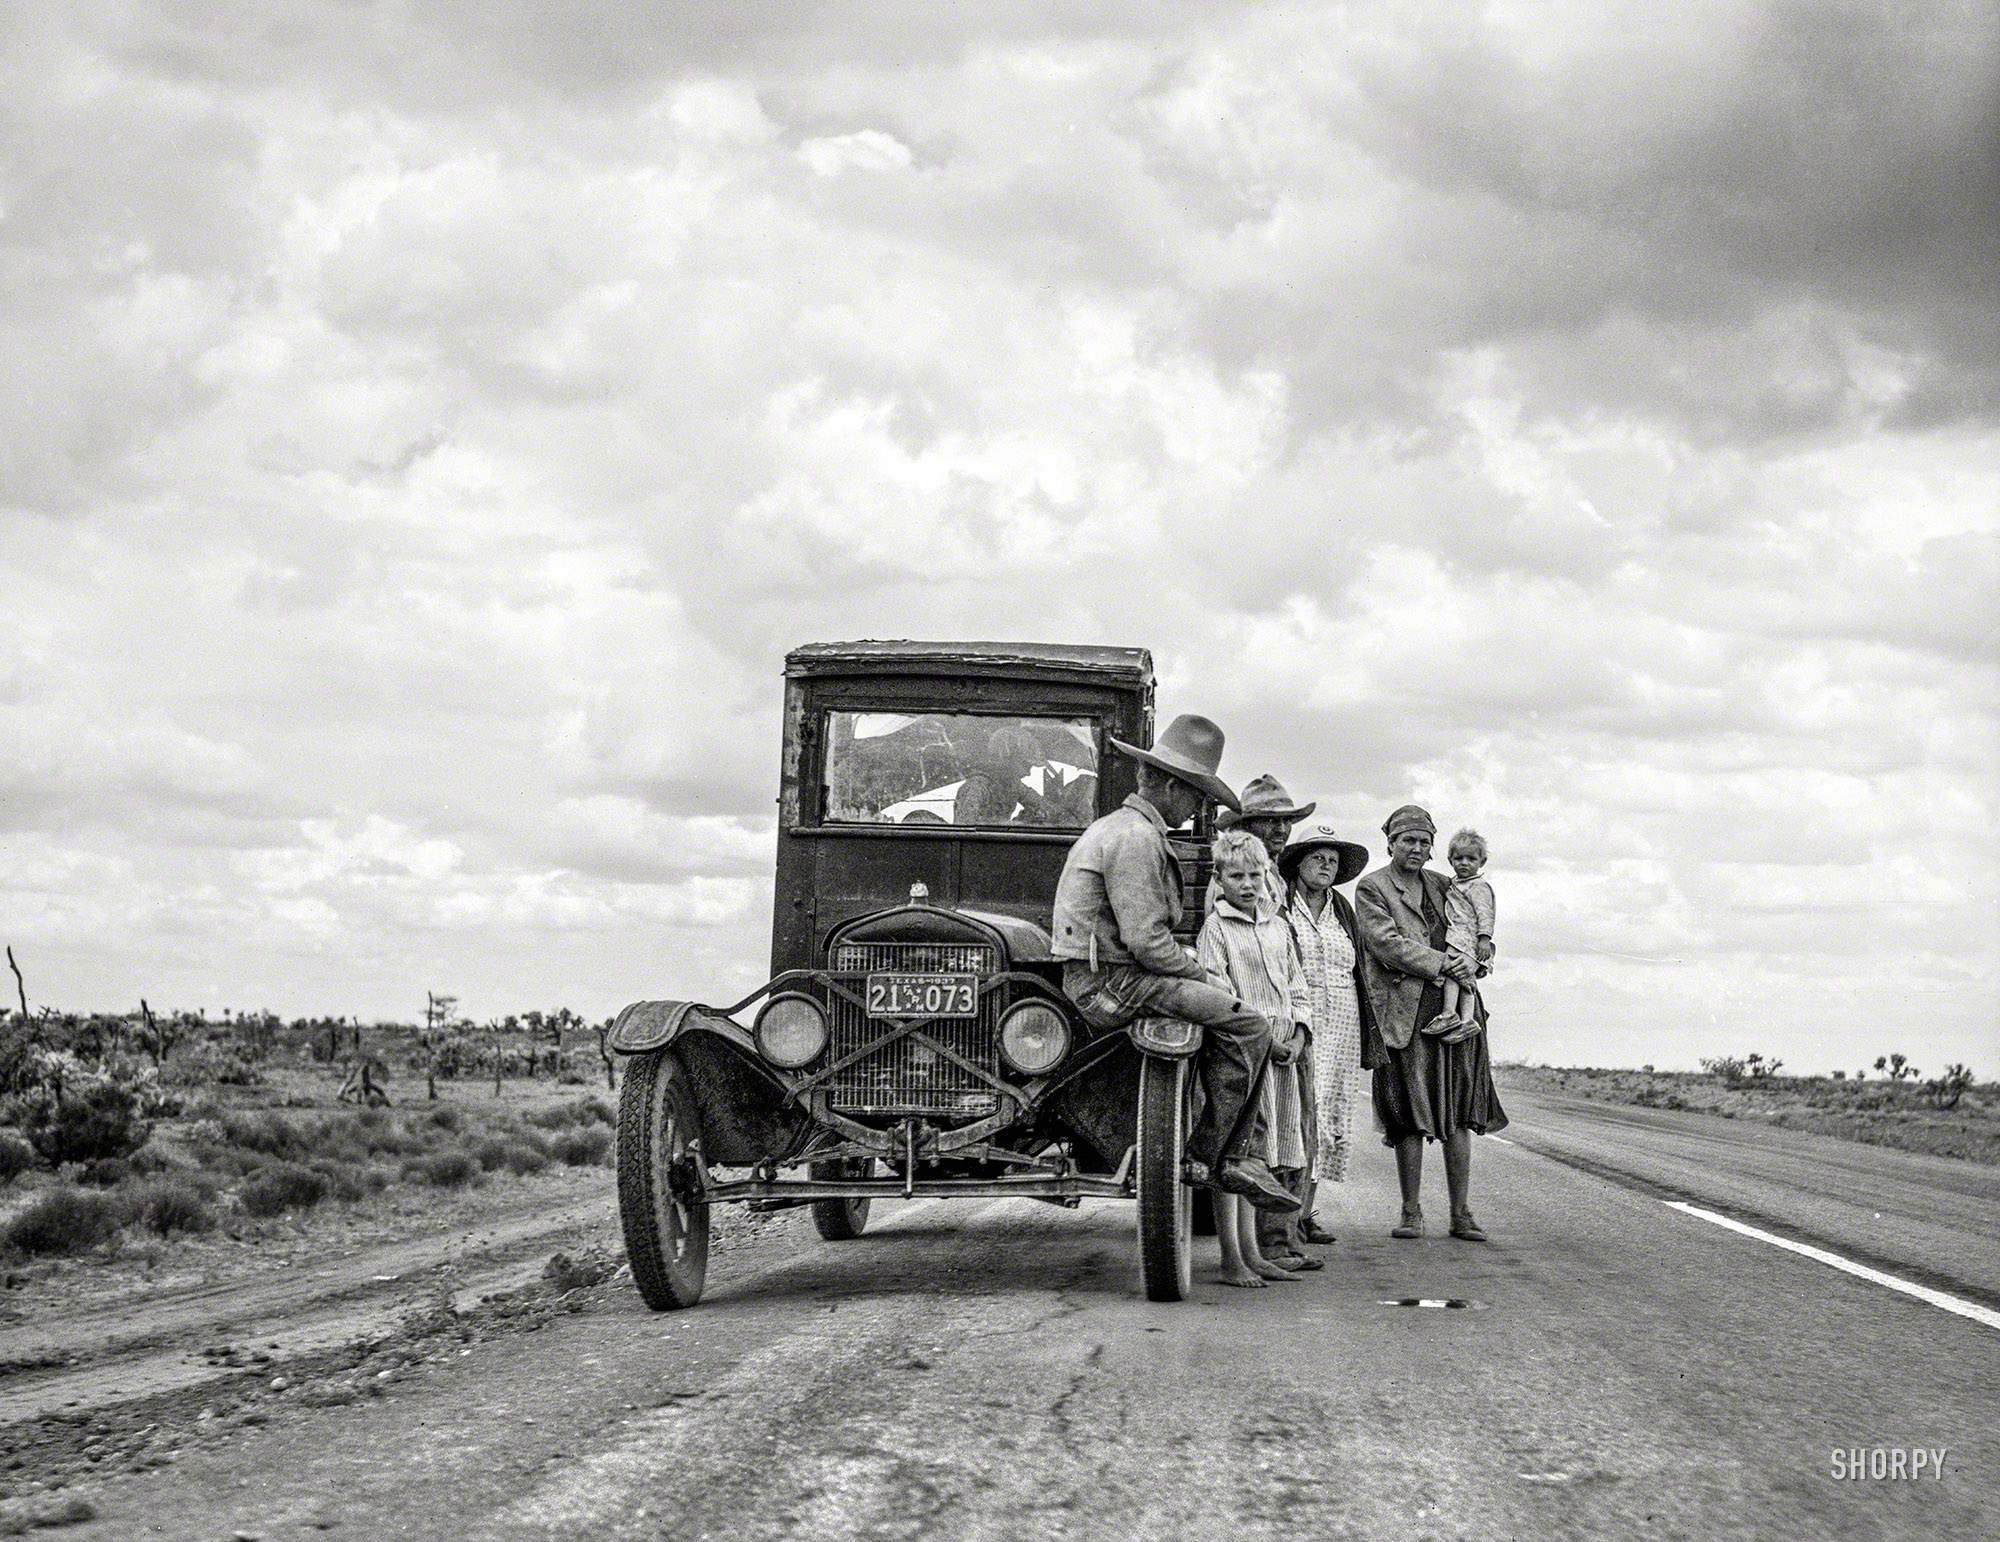 May 1937. "One of three related Oklahoma drought refugee families on the highway near Lordsburg, New Mexico, going to Roswell to chop cotton." Photo by Dorothea Lange for the Resettlement Administration. View full size.